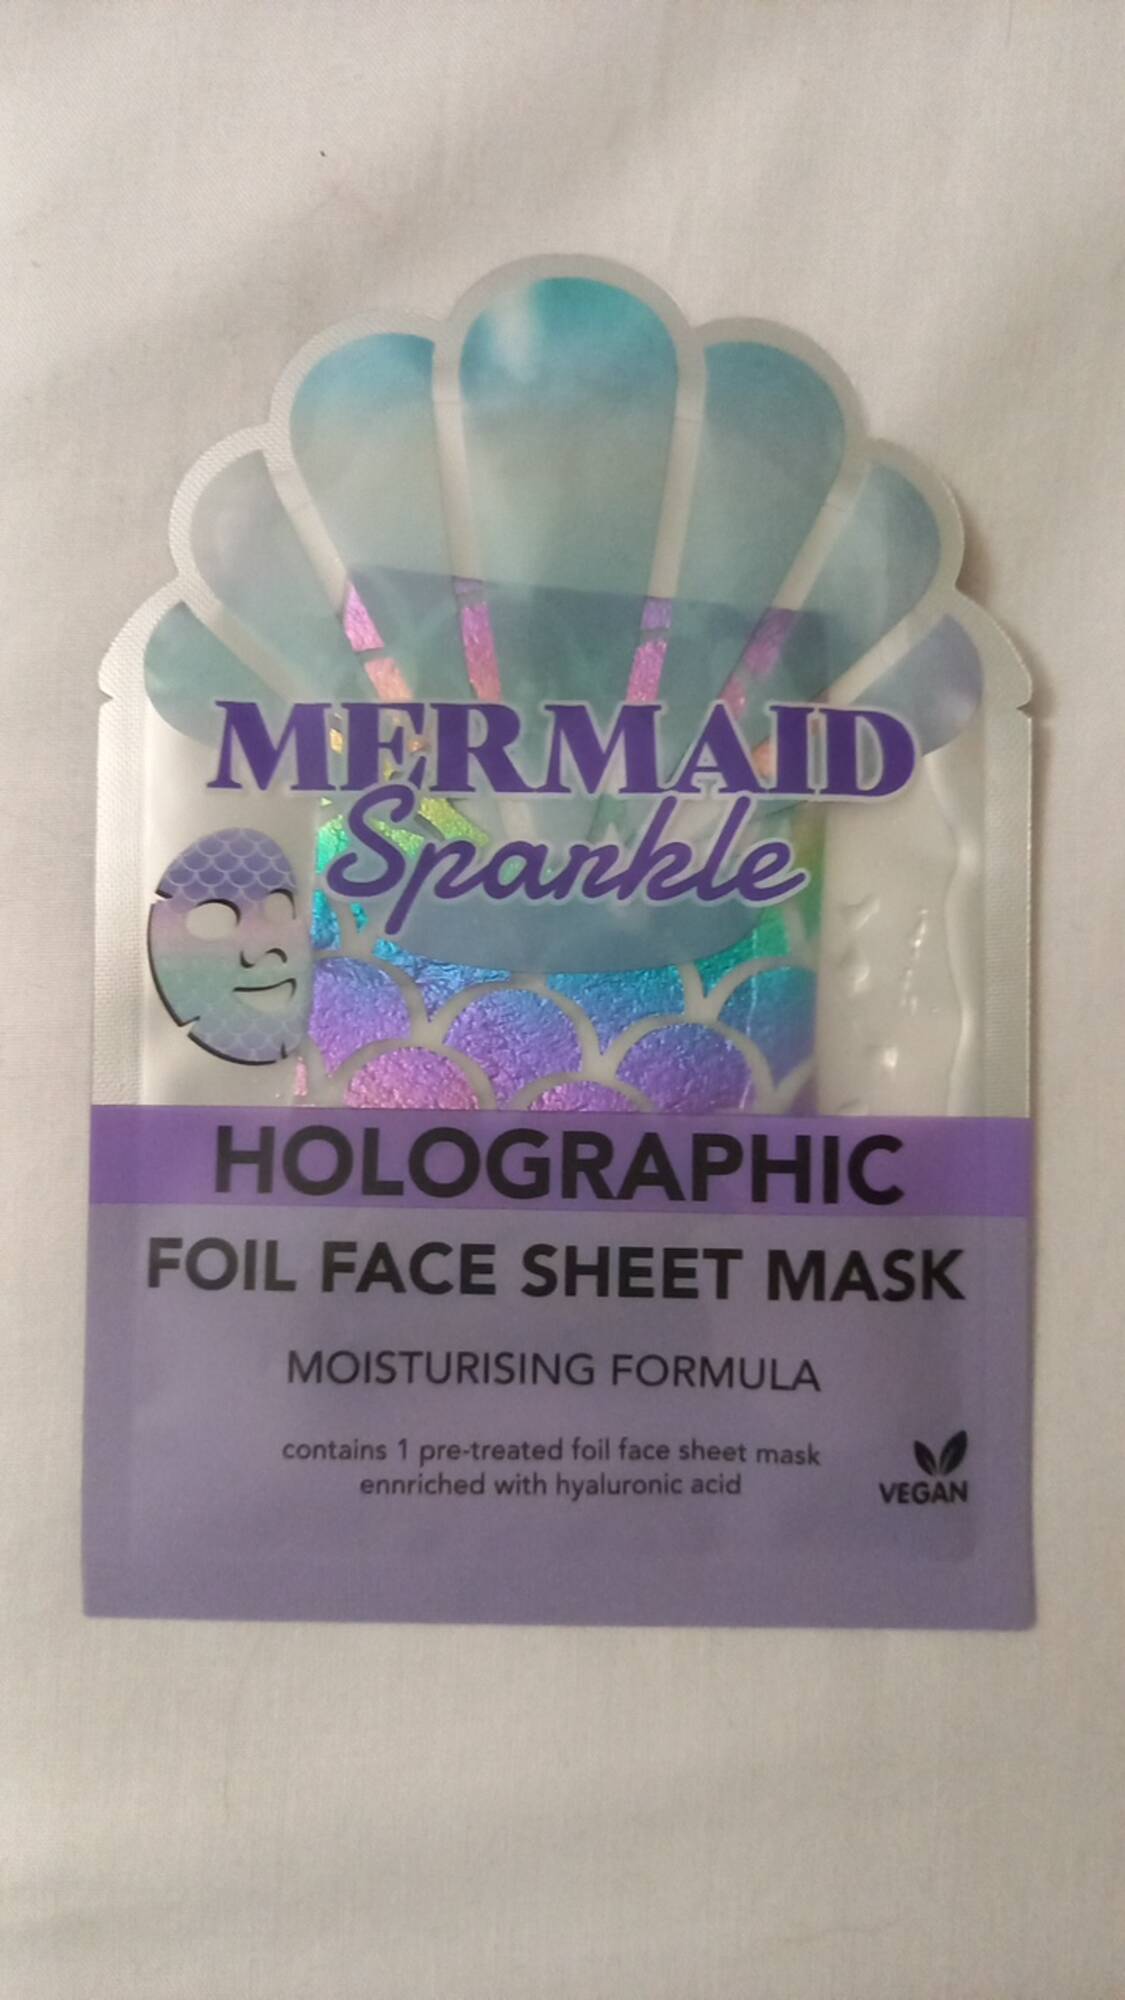 MAXBRANDS - Mermaid holographic - Foil face sheet mask